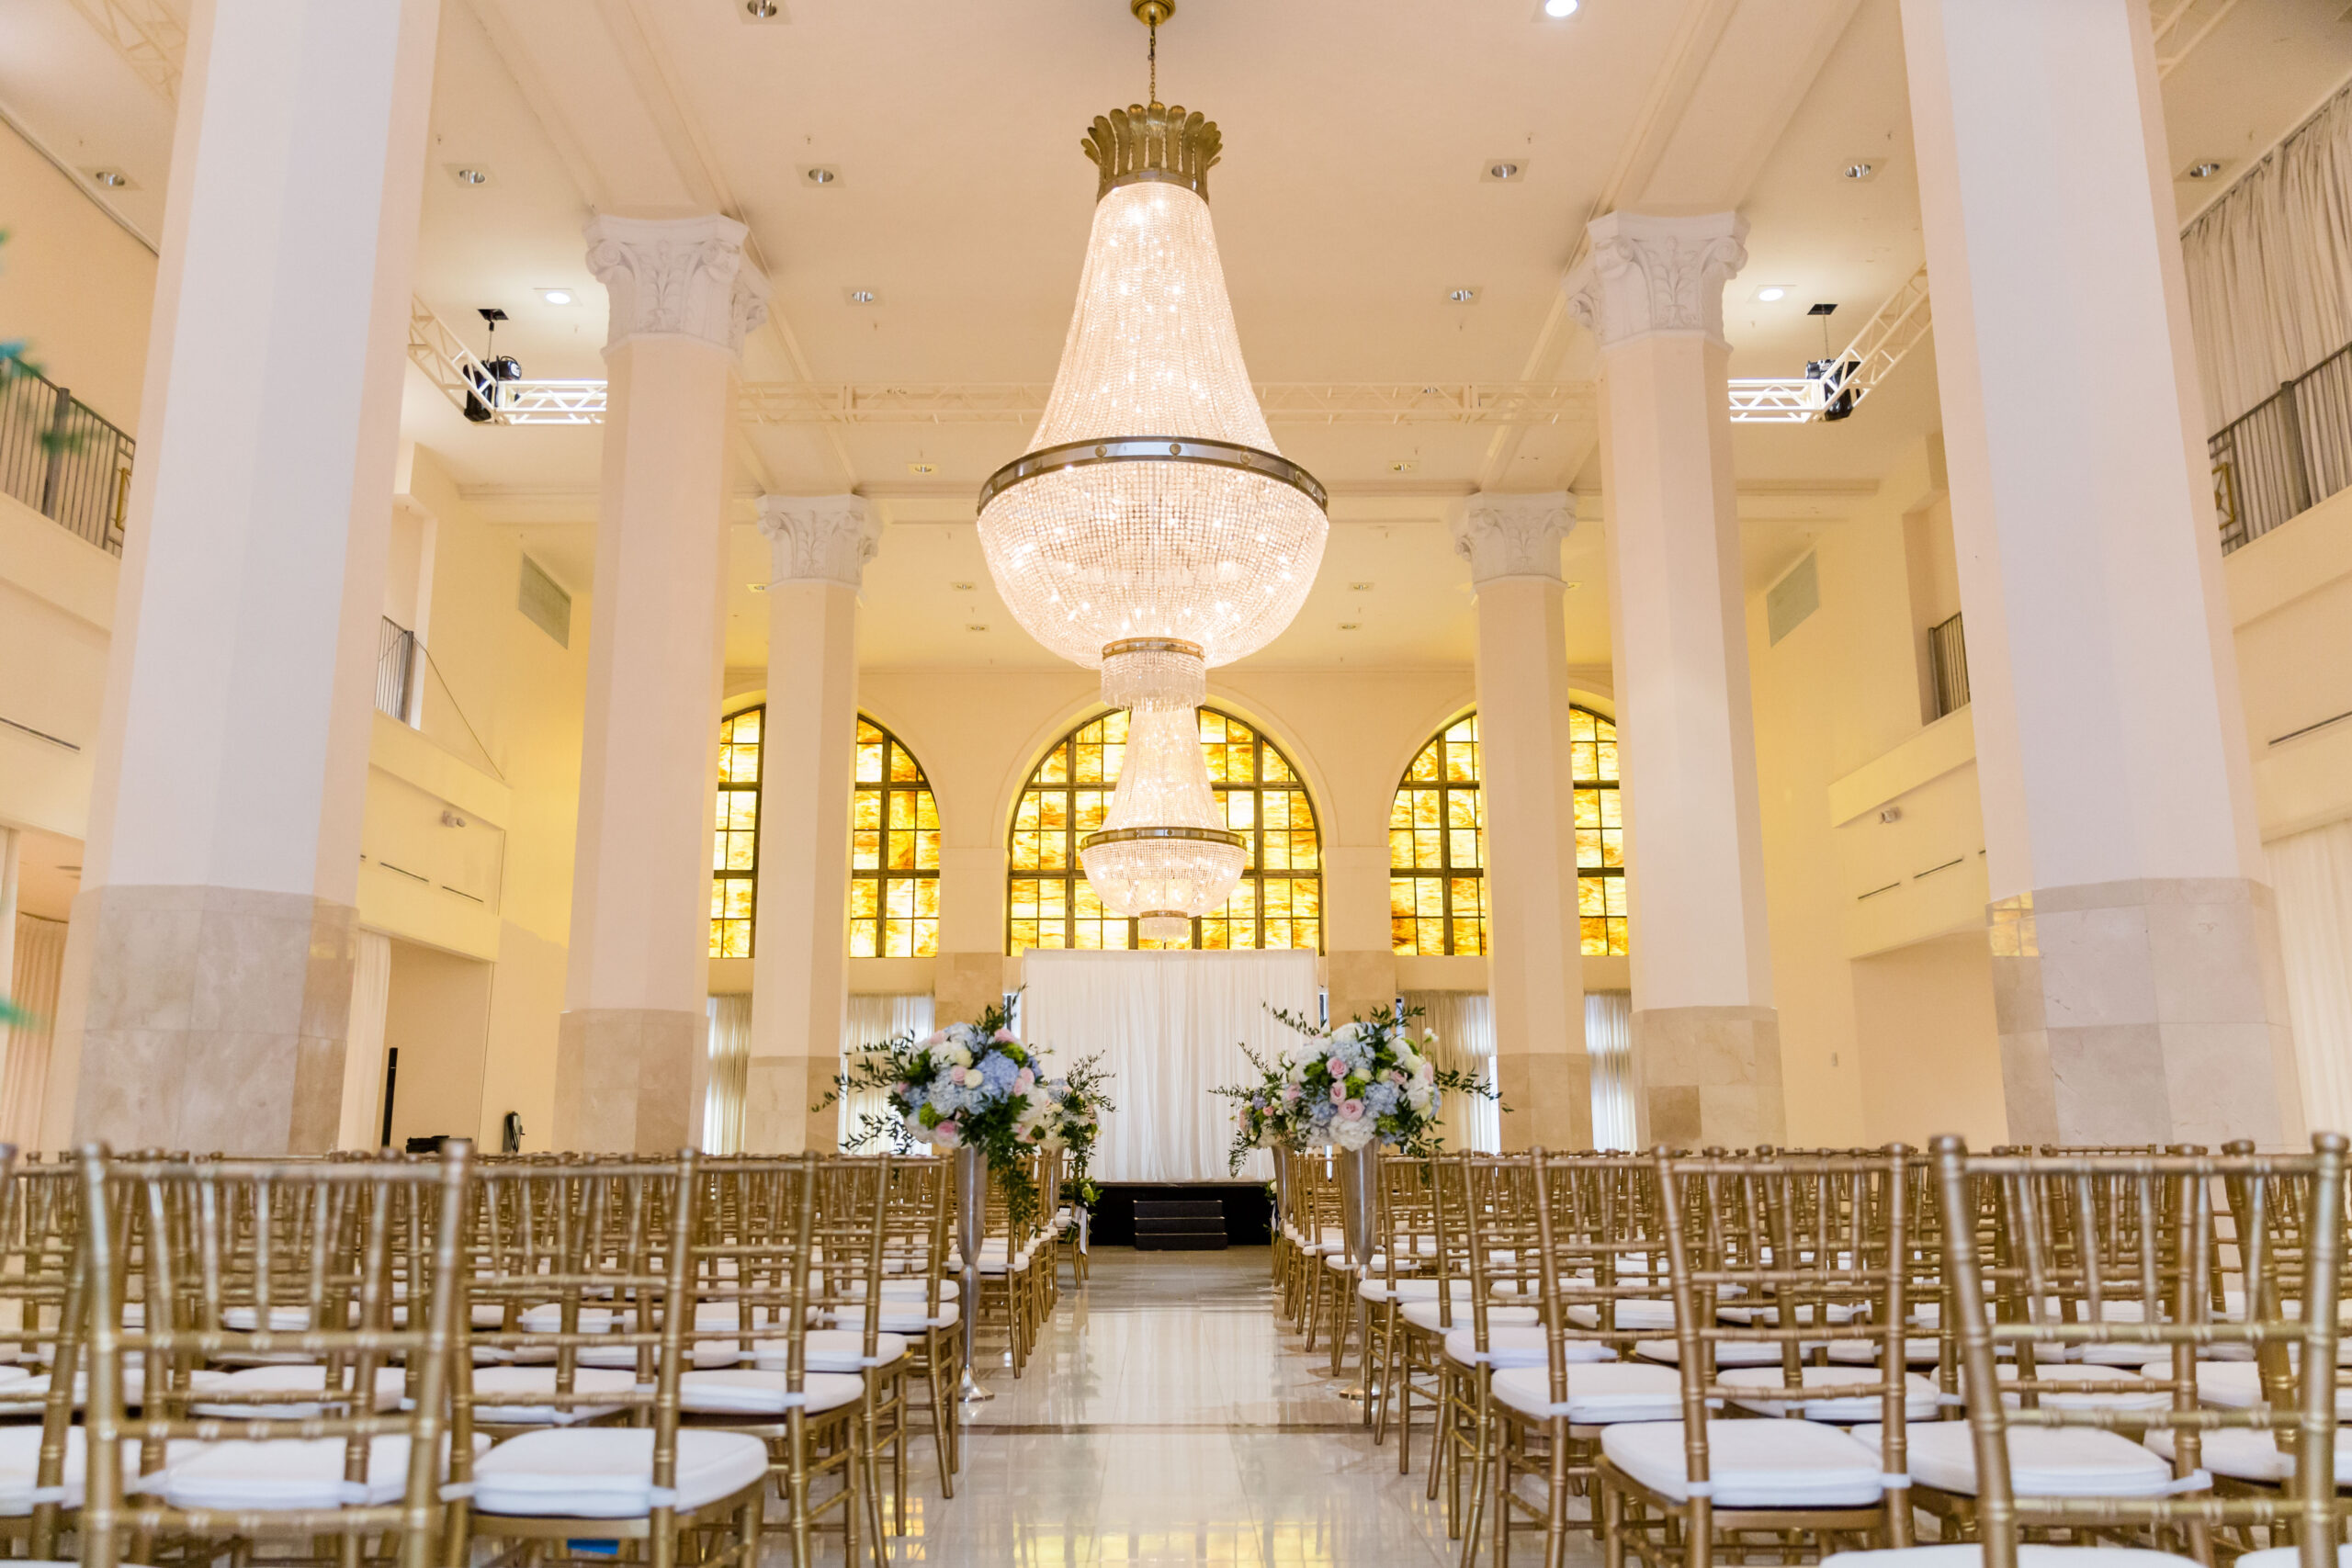 All white interiors inside a ballroom with four pillars and a grand chandelier in the middle and gold chairs piled neatly